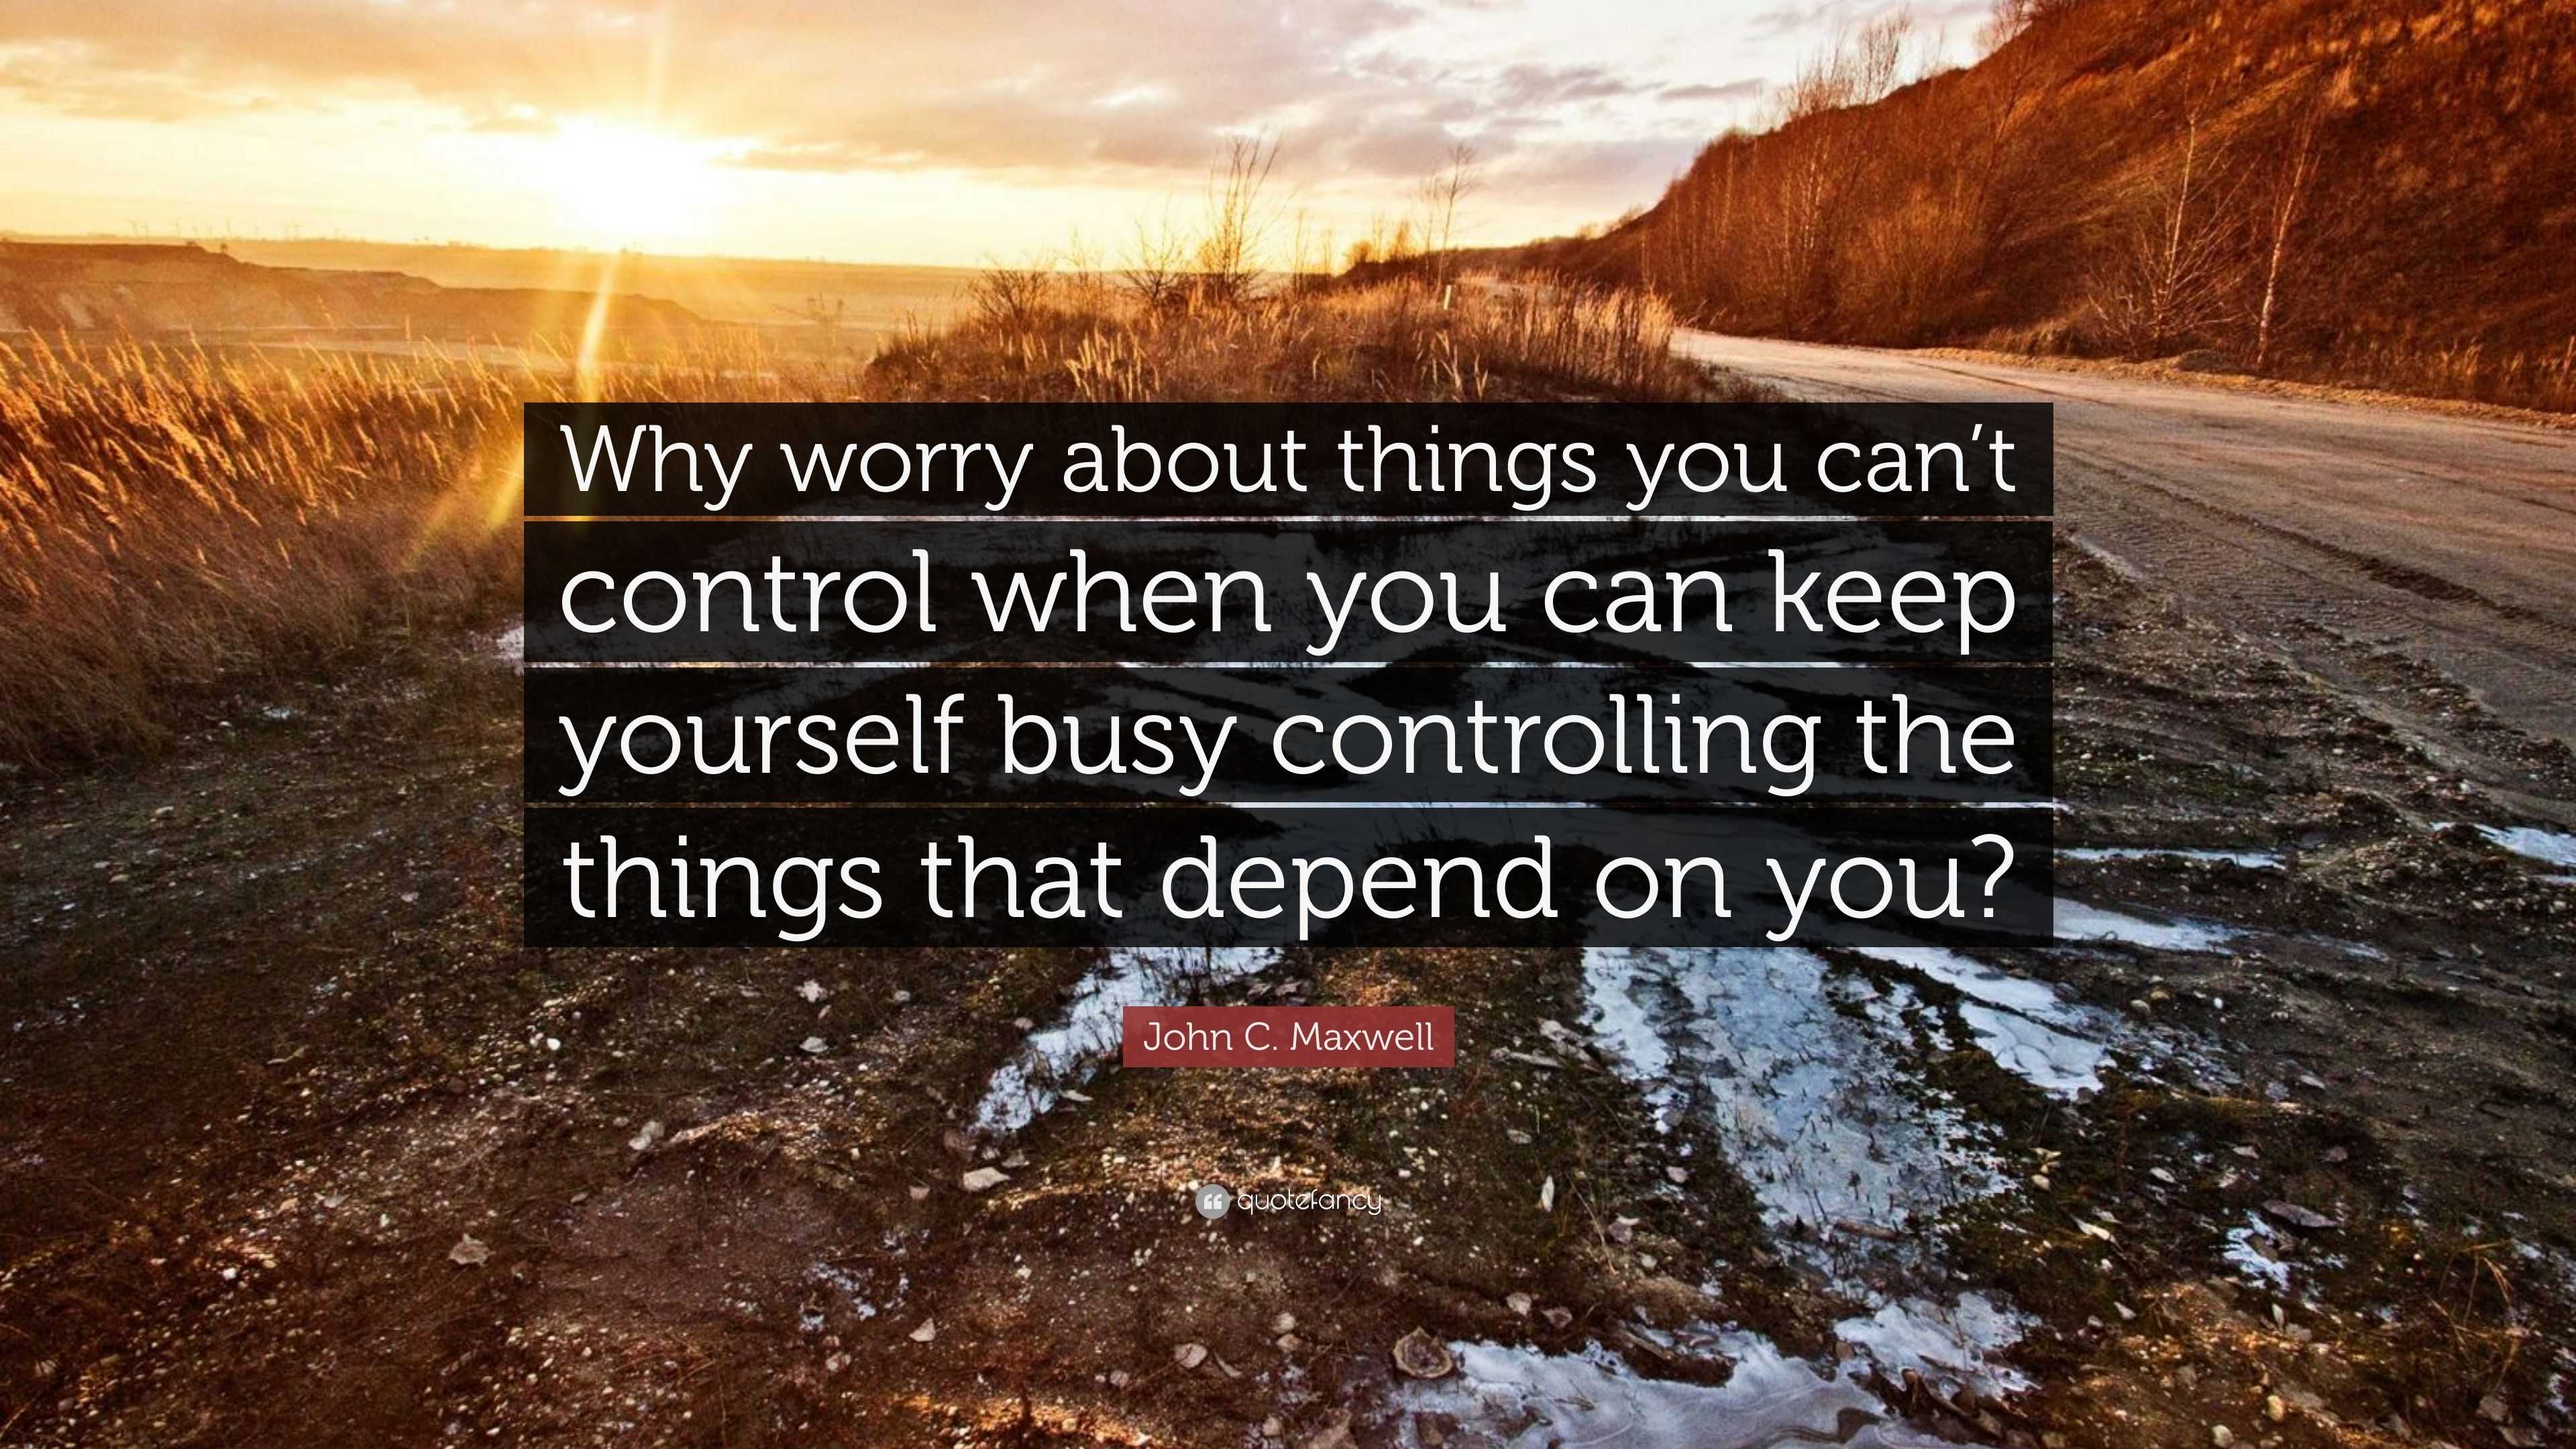 4735463 John C Maxwell Quote Why worry about things you can t control when